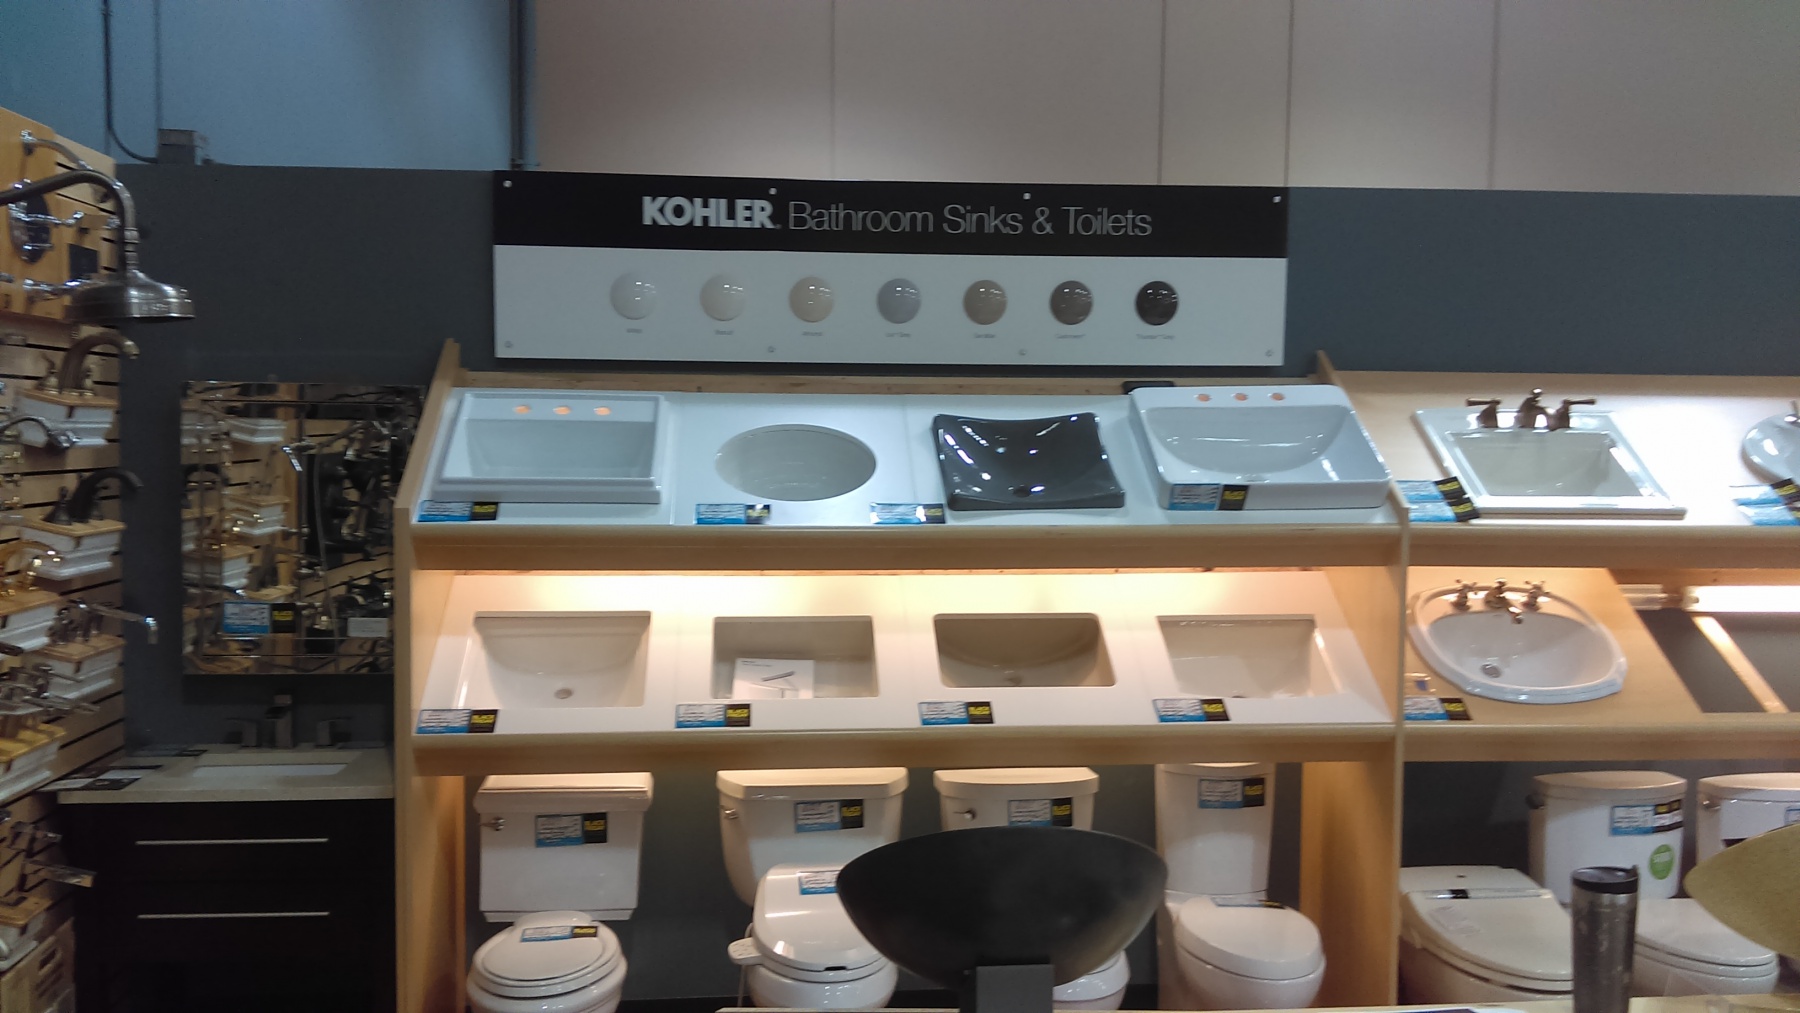 Nationwide Fixture Installations Inc Kohler Case Study New Store Installation Retail Rollouts Shop-in-Shop Program Management Signage